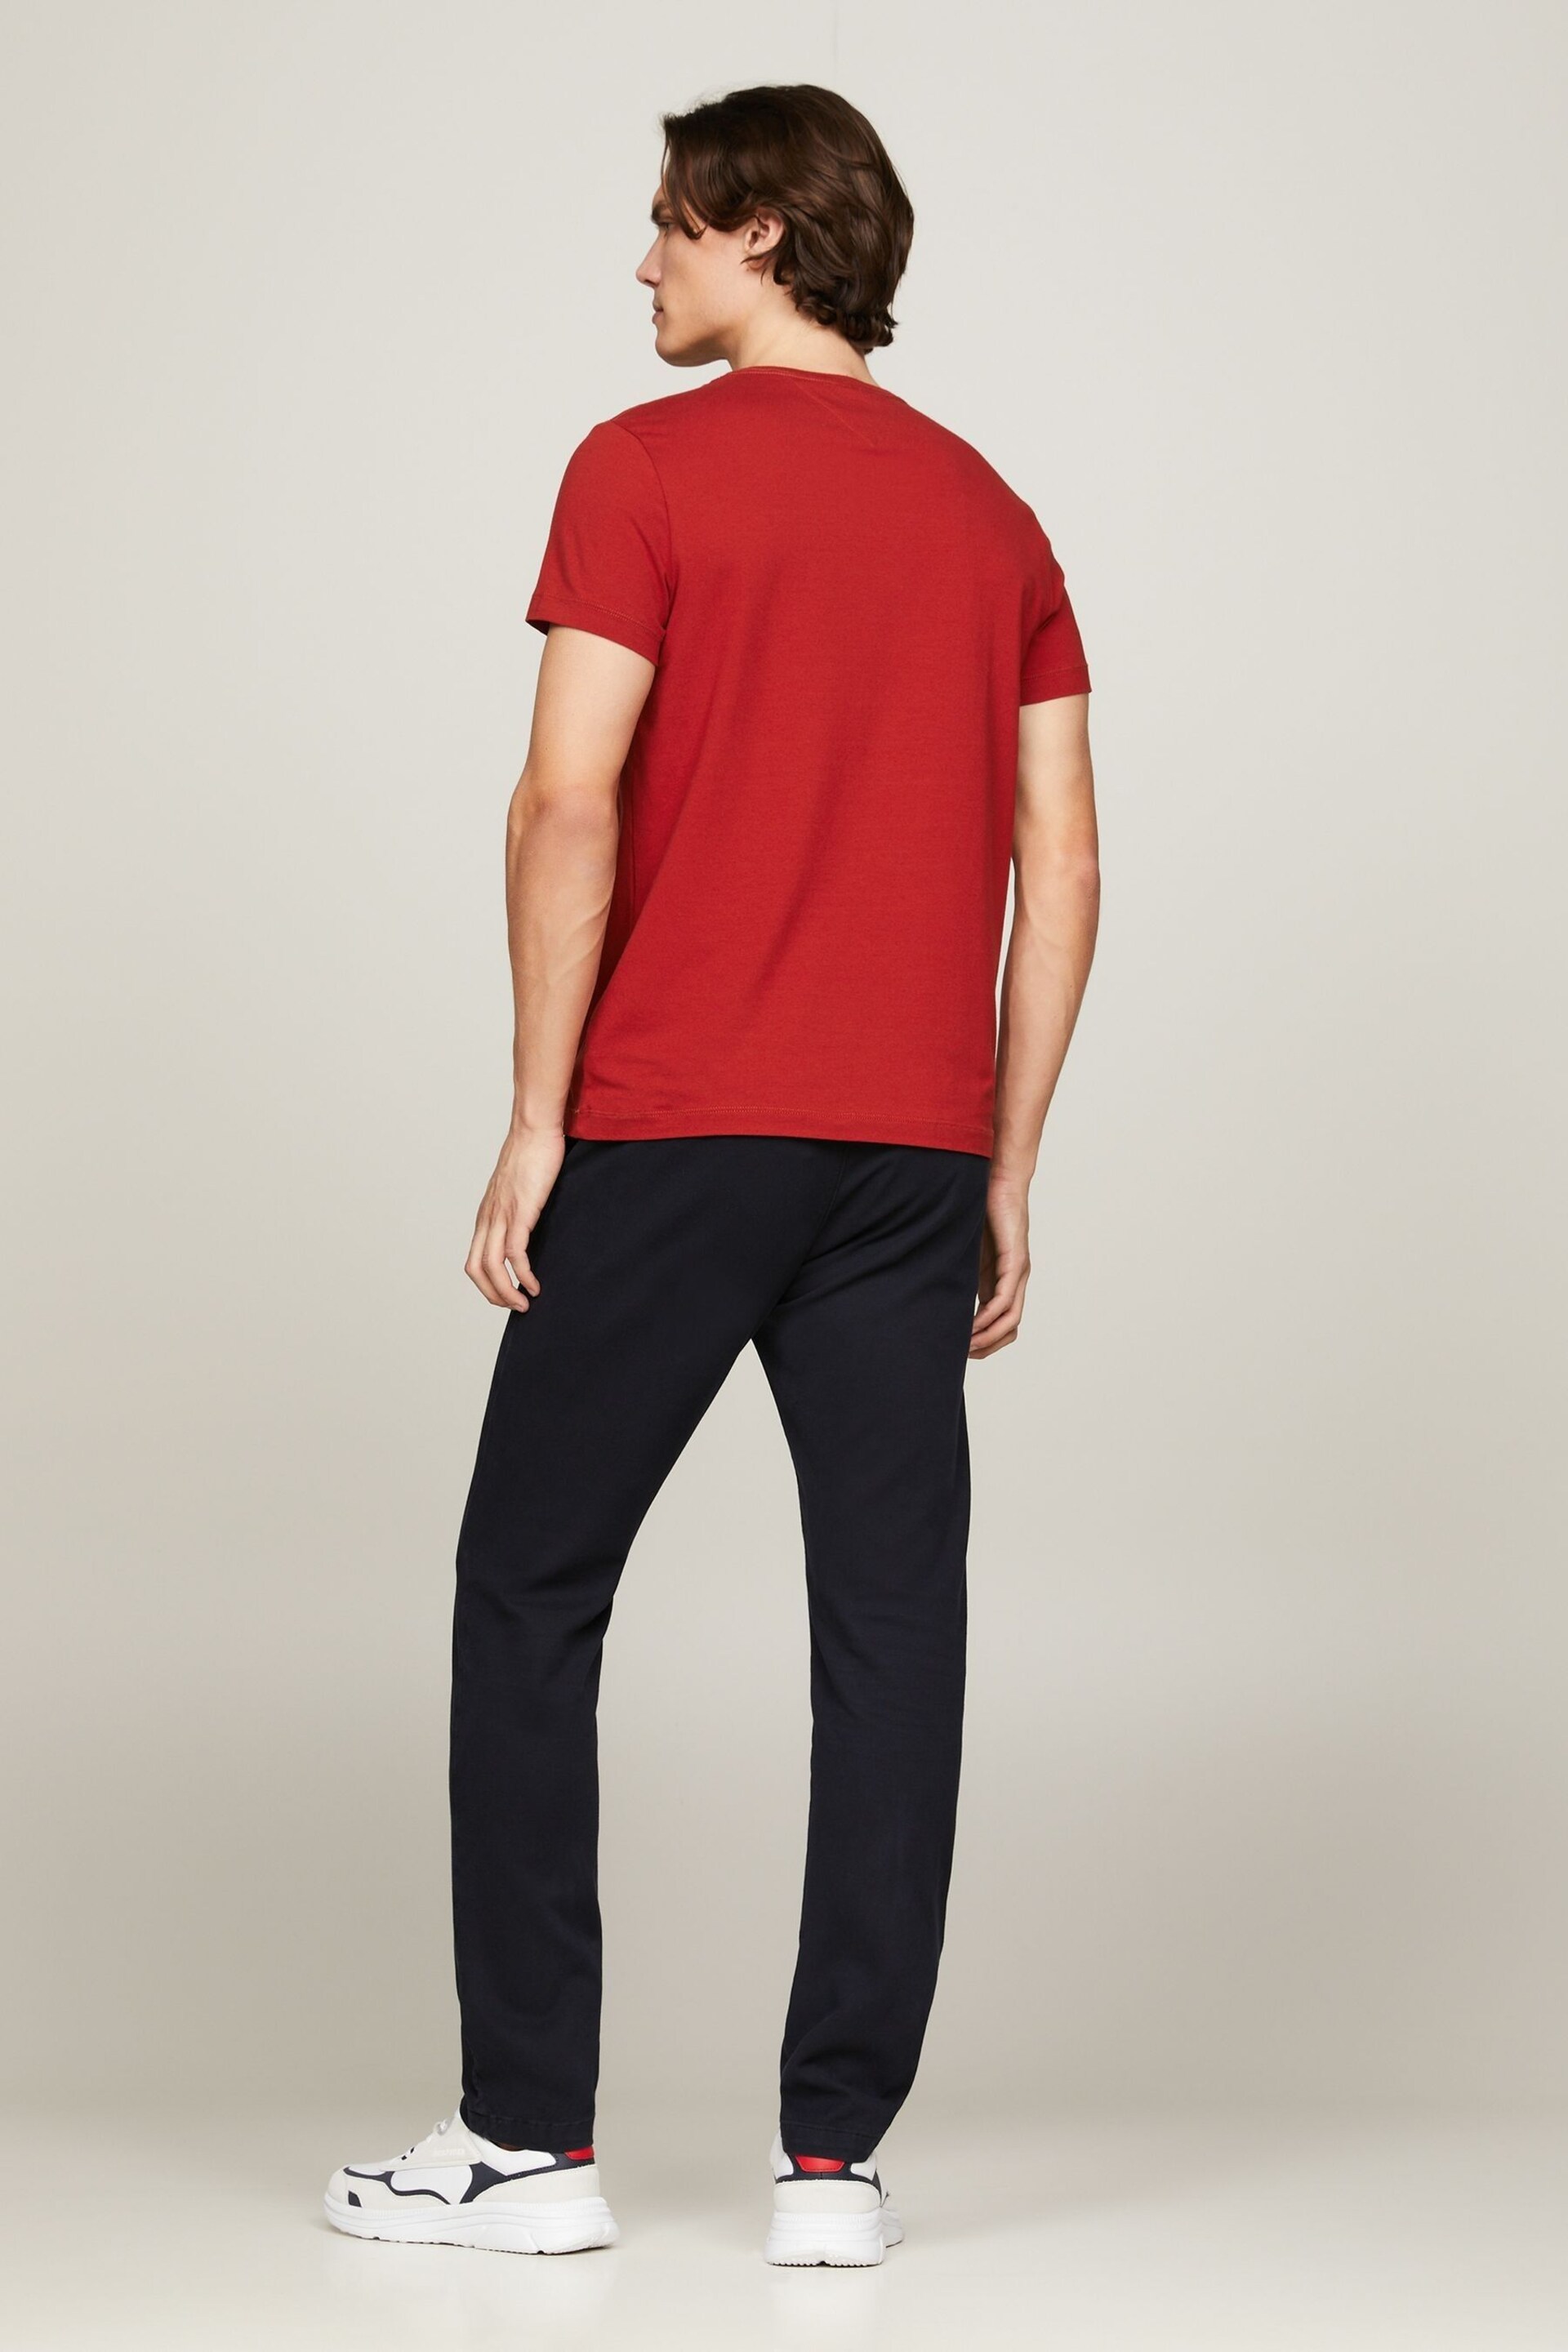 Tommy Hilfiger Stretch Slim Fit Red T-Shirt - Image 2 of 4